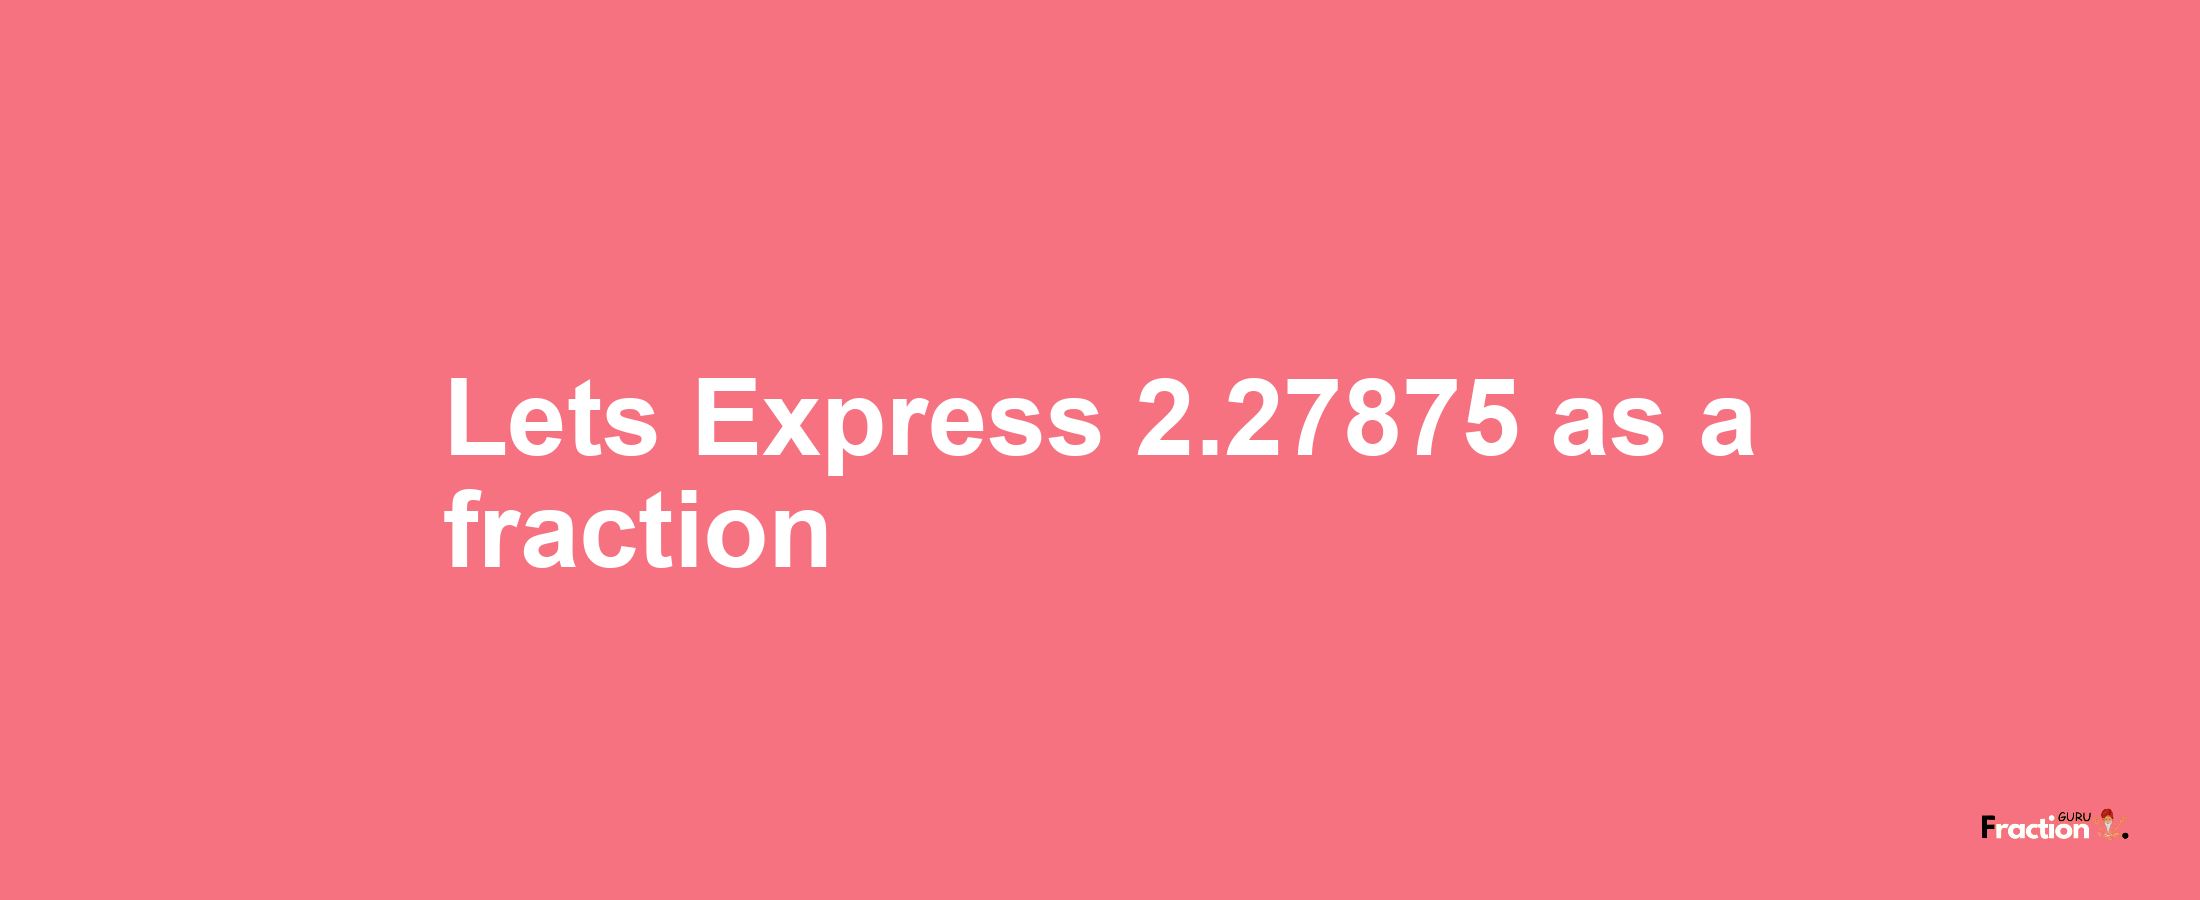 Lets Express 2.27875 as afraction